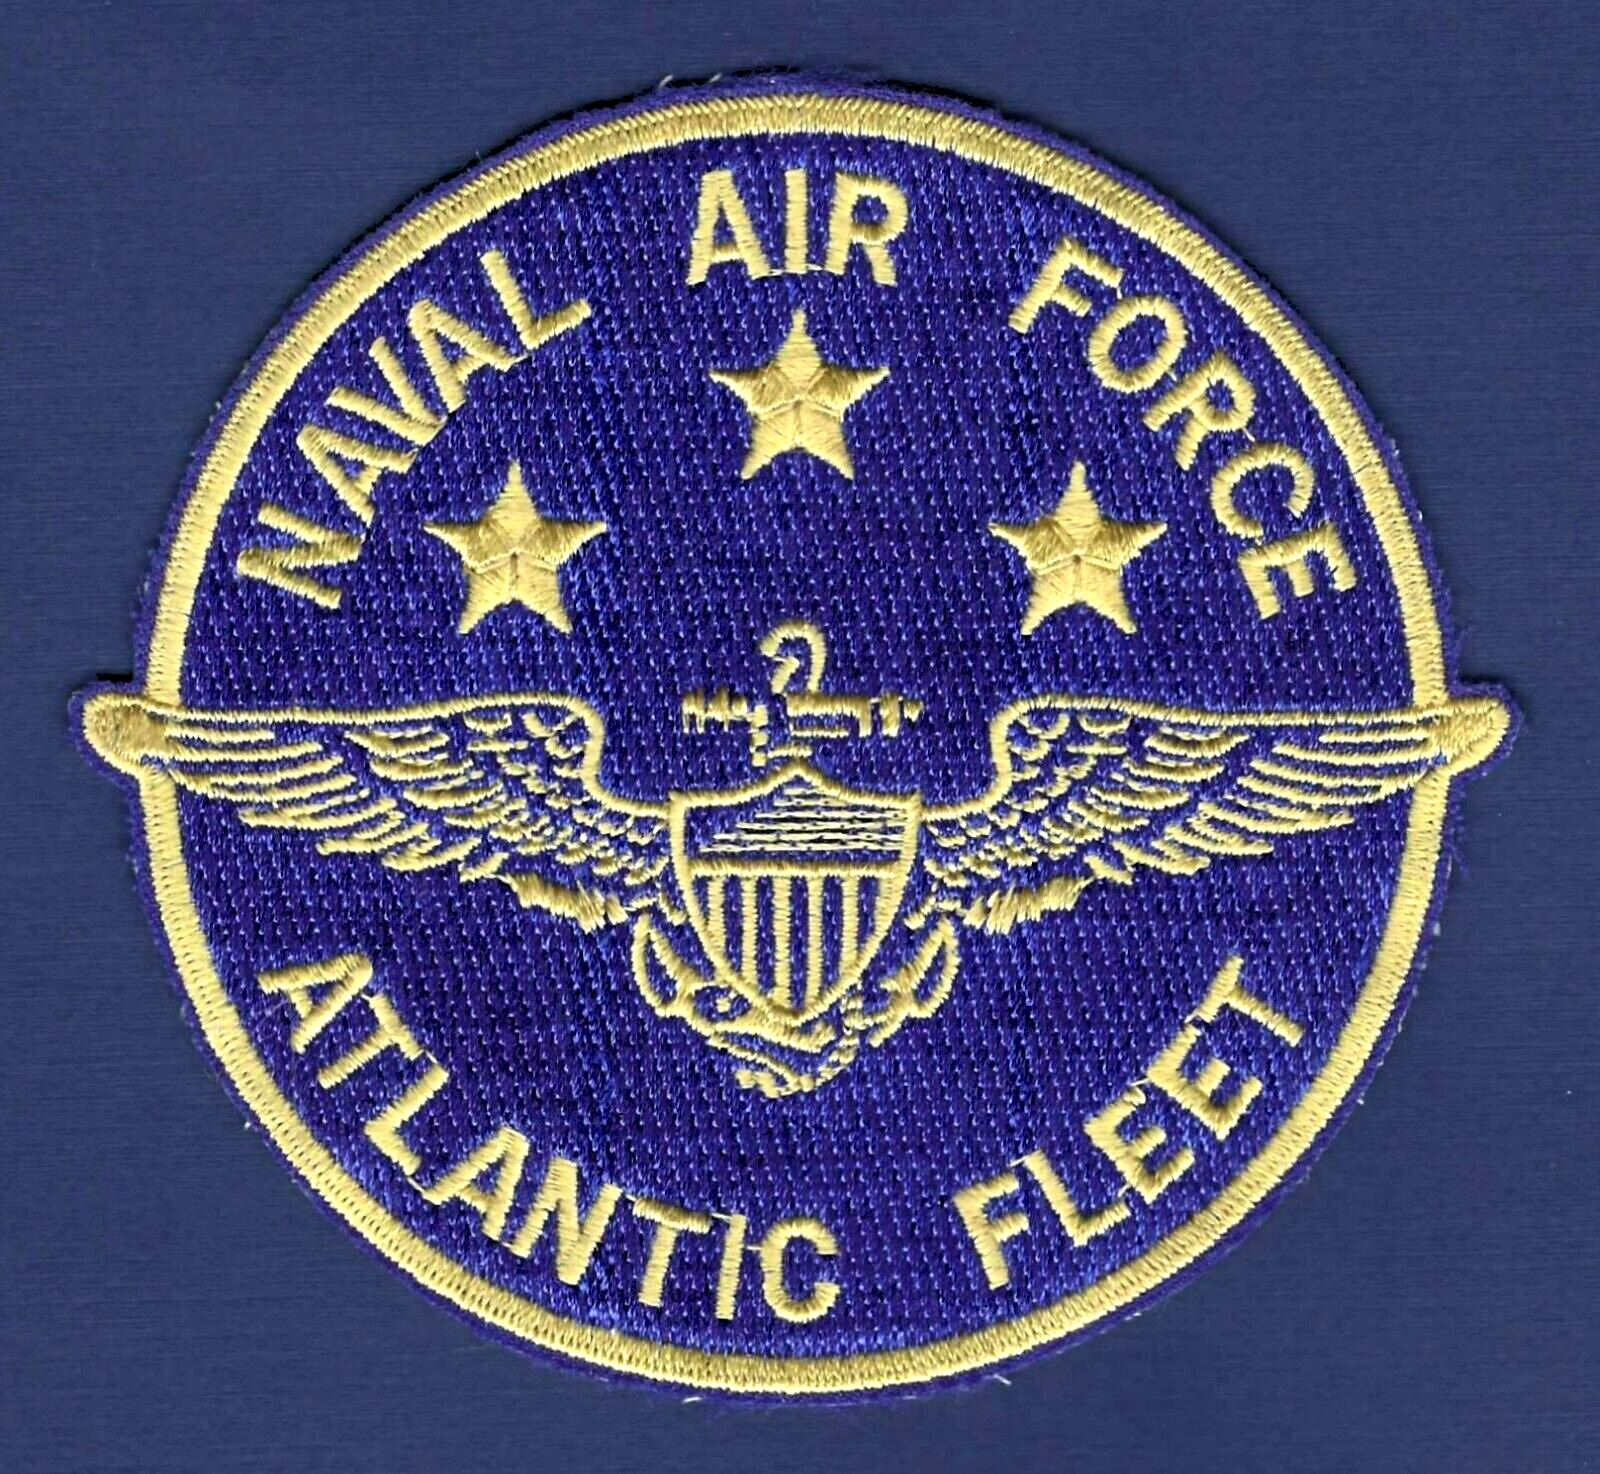 US Naval Air Force Atlantic Fleet Vice Admiral Patch